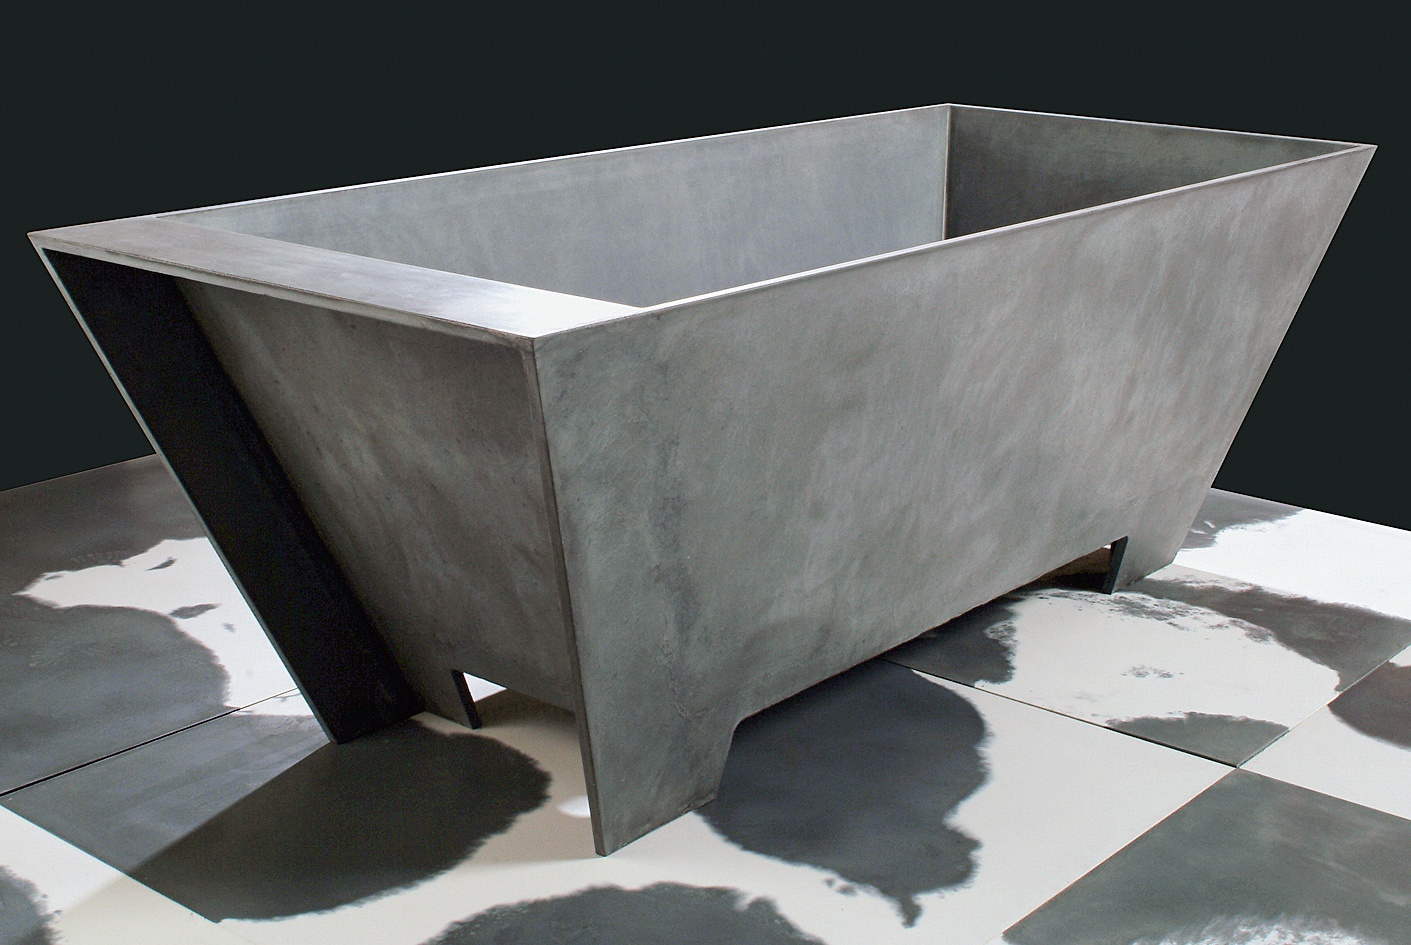 The low permeability and high durability of Ductal makes it an intriguing material for plumbing fixtures. As shown by this tub designed by Francesco Passaniti, the thin sections provide sculptural opportunities not possible with thick concrete tubs or washbasins.